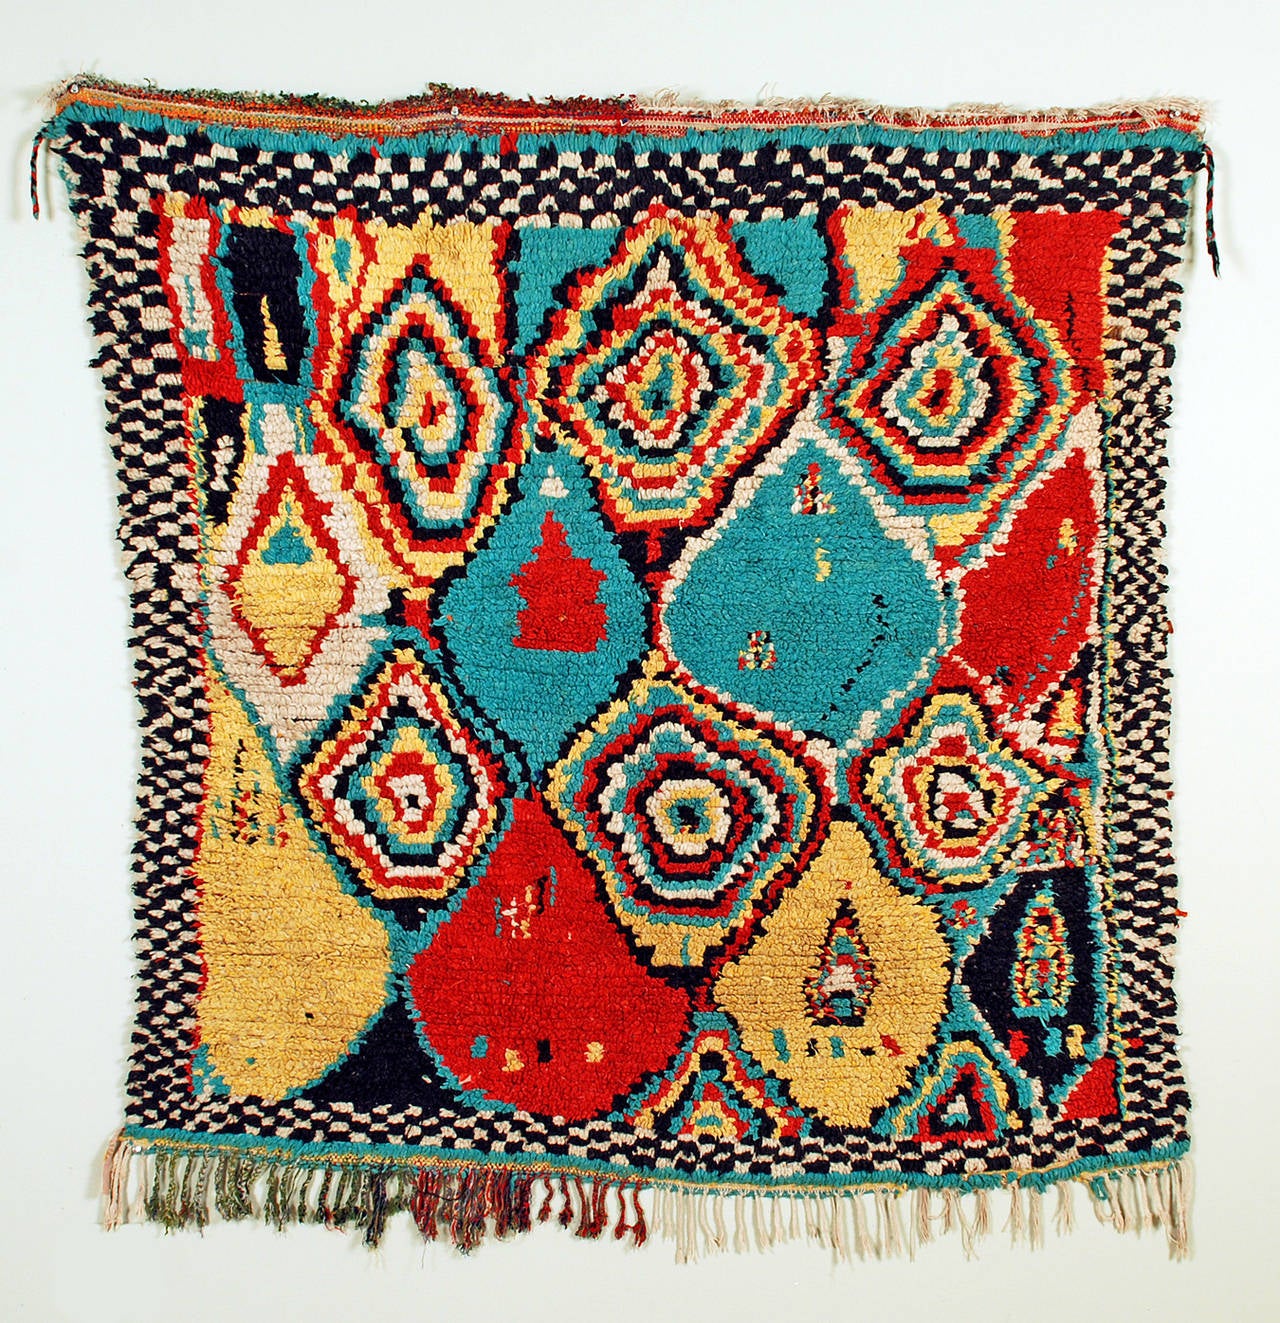 This graphic hand knotted Berber carpet comes from the 'Azilal' province in the High Atlas mountains of Morocco. This rug features a richly colored palette of red, yellow, green and blue circular motifs surrounded by a black and white checkered